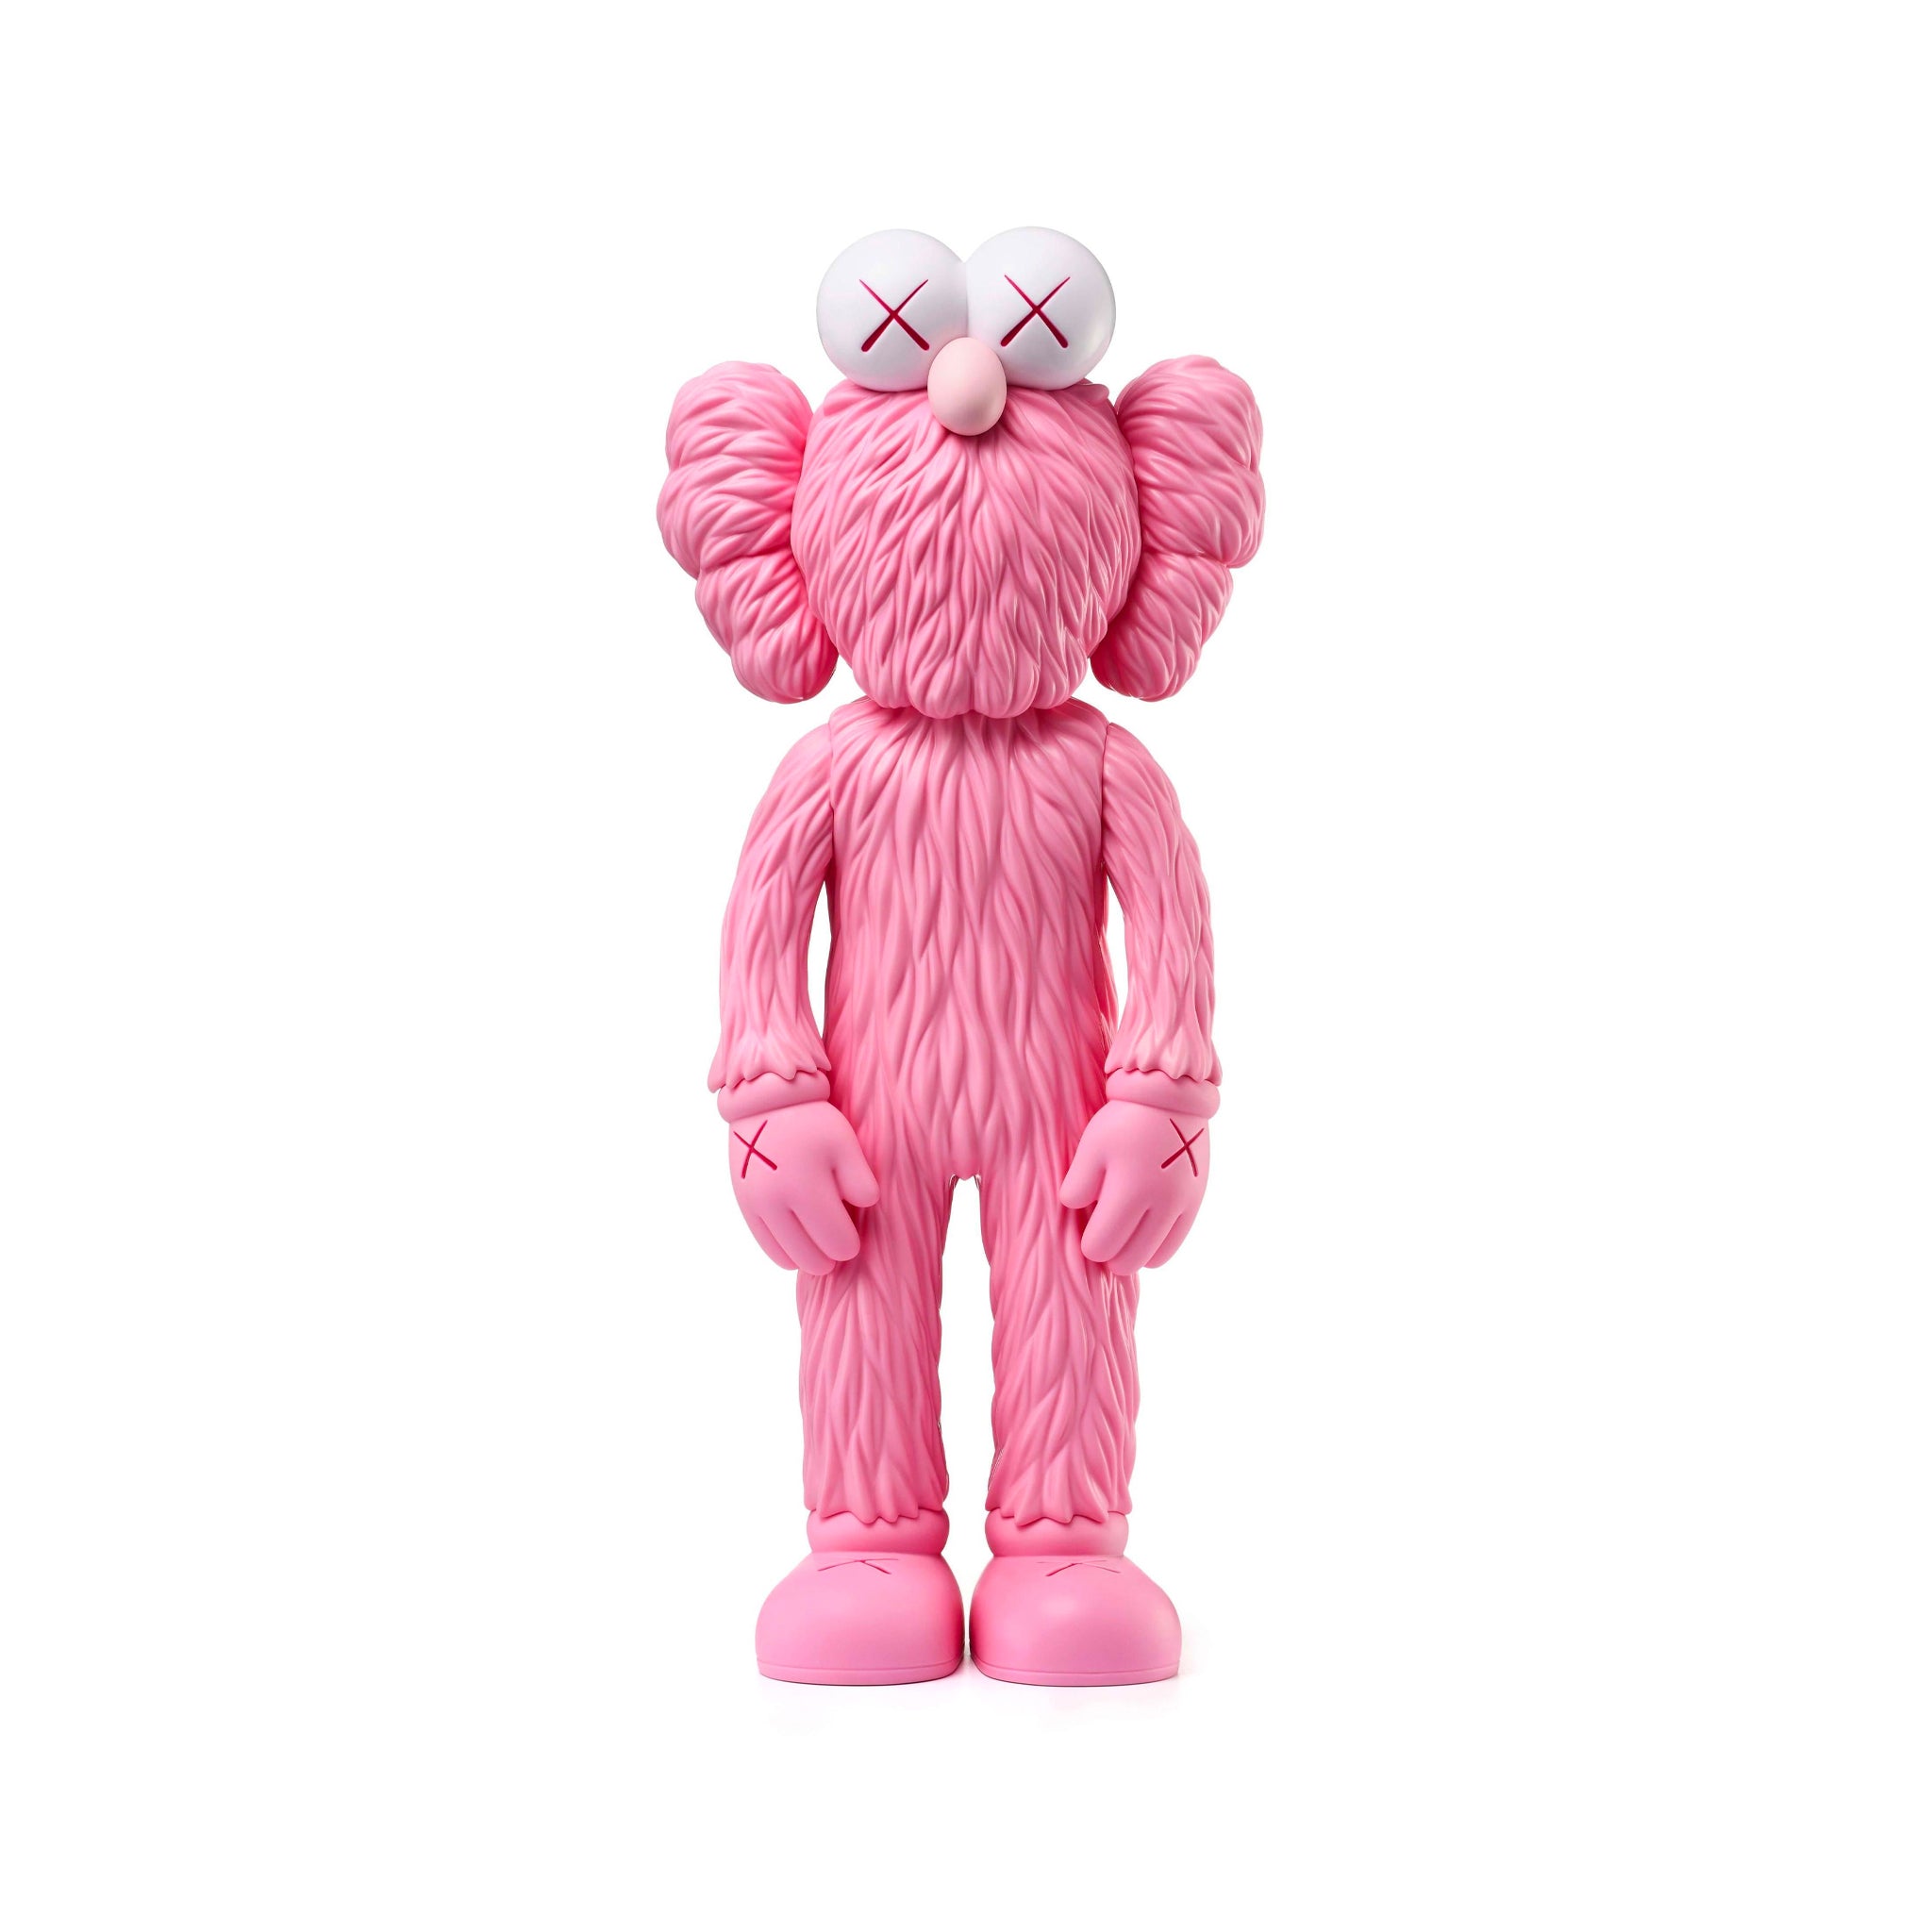 KAWS BFF OPEN EDITION PINK